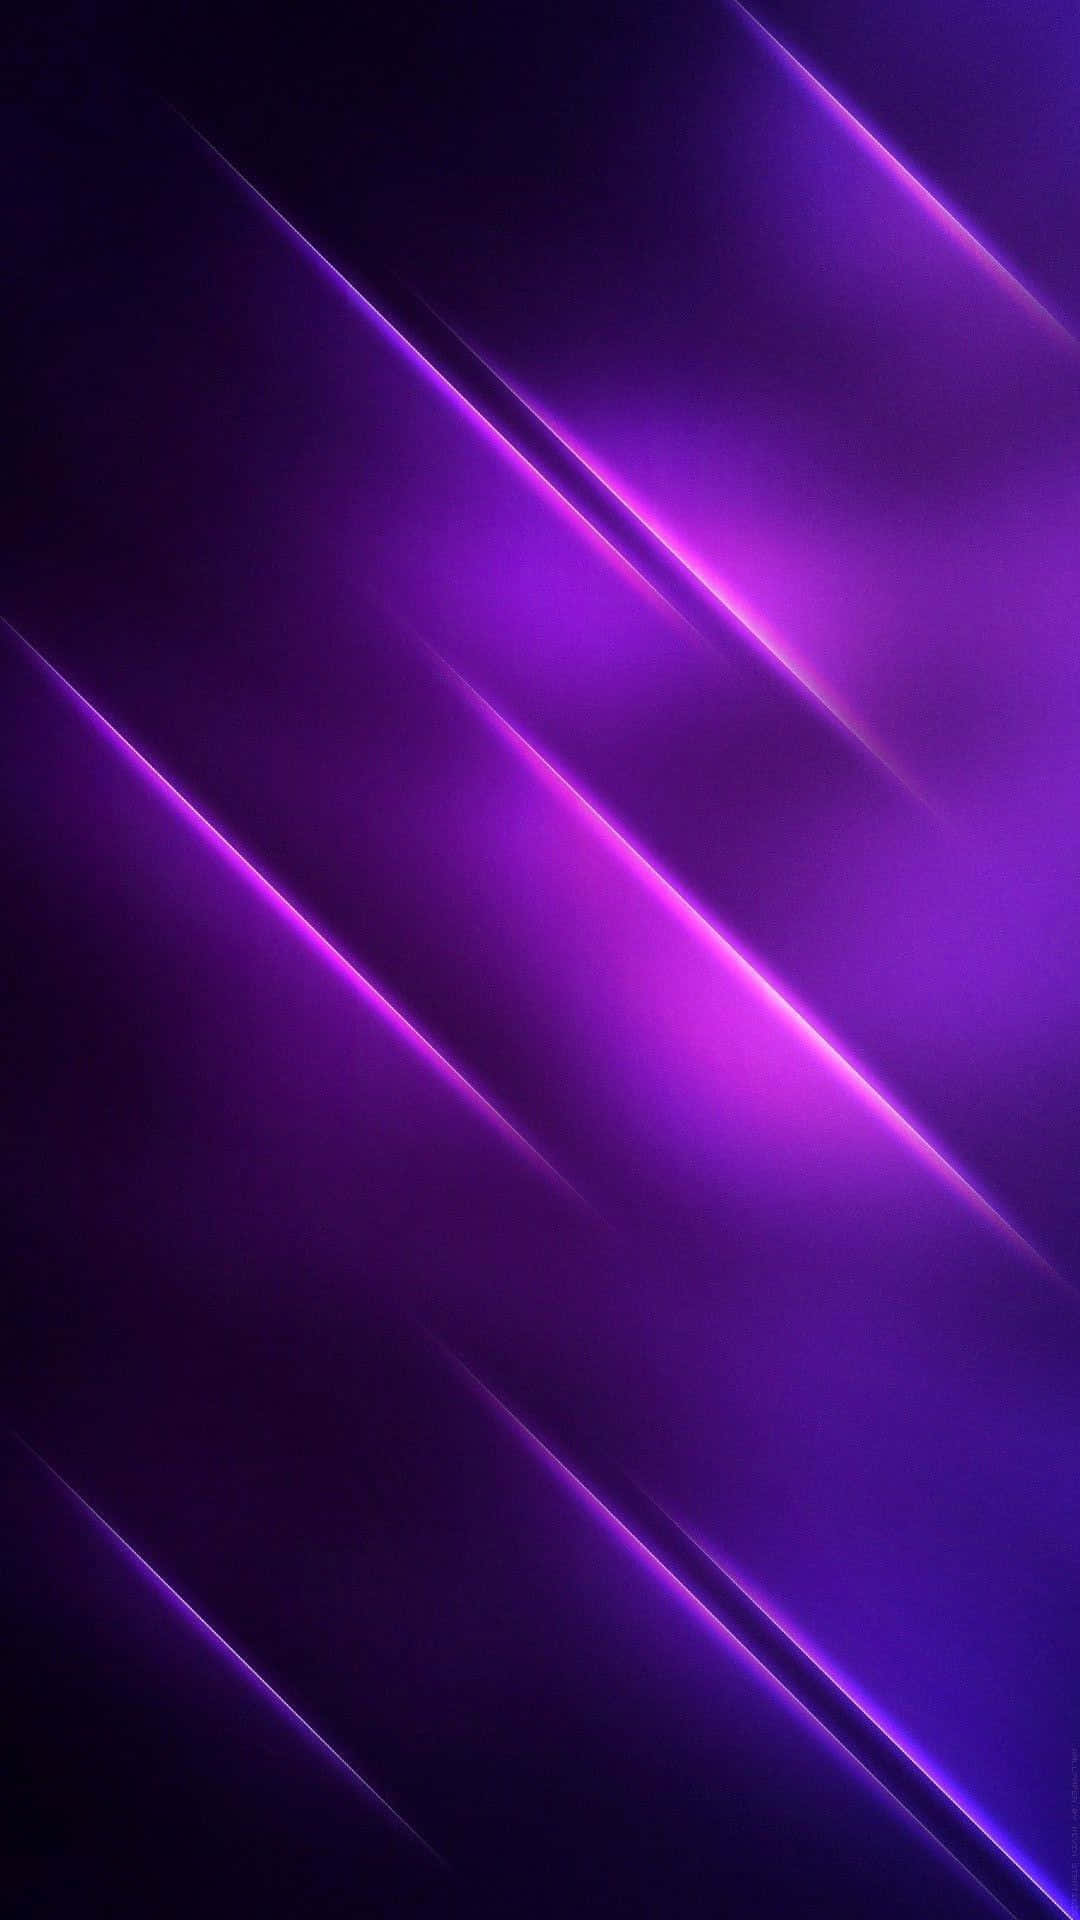 Purple And Black Background With Lines Wallpaper